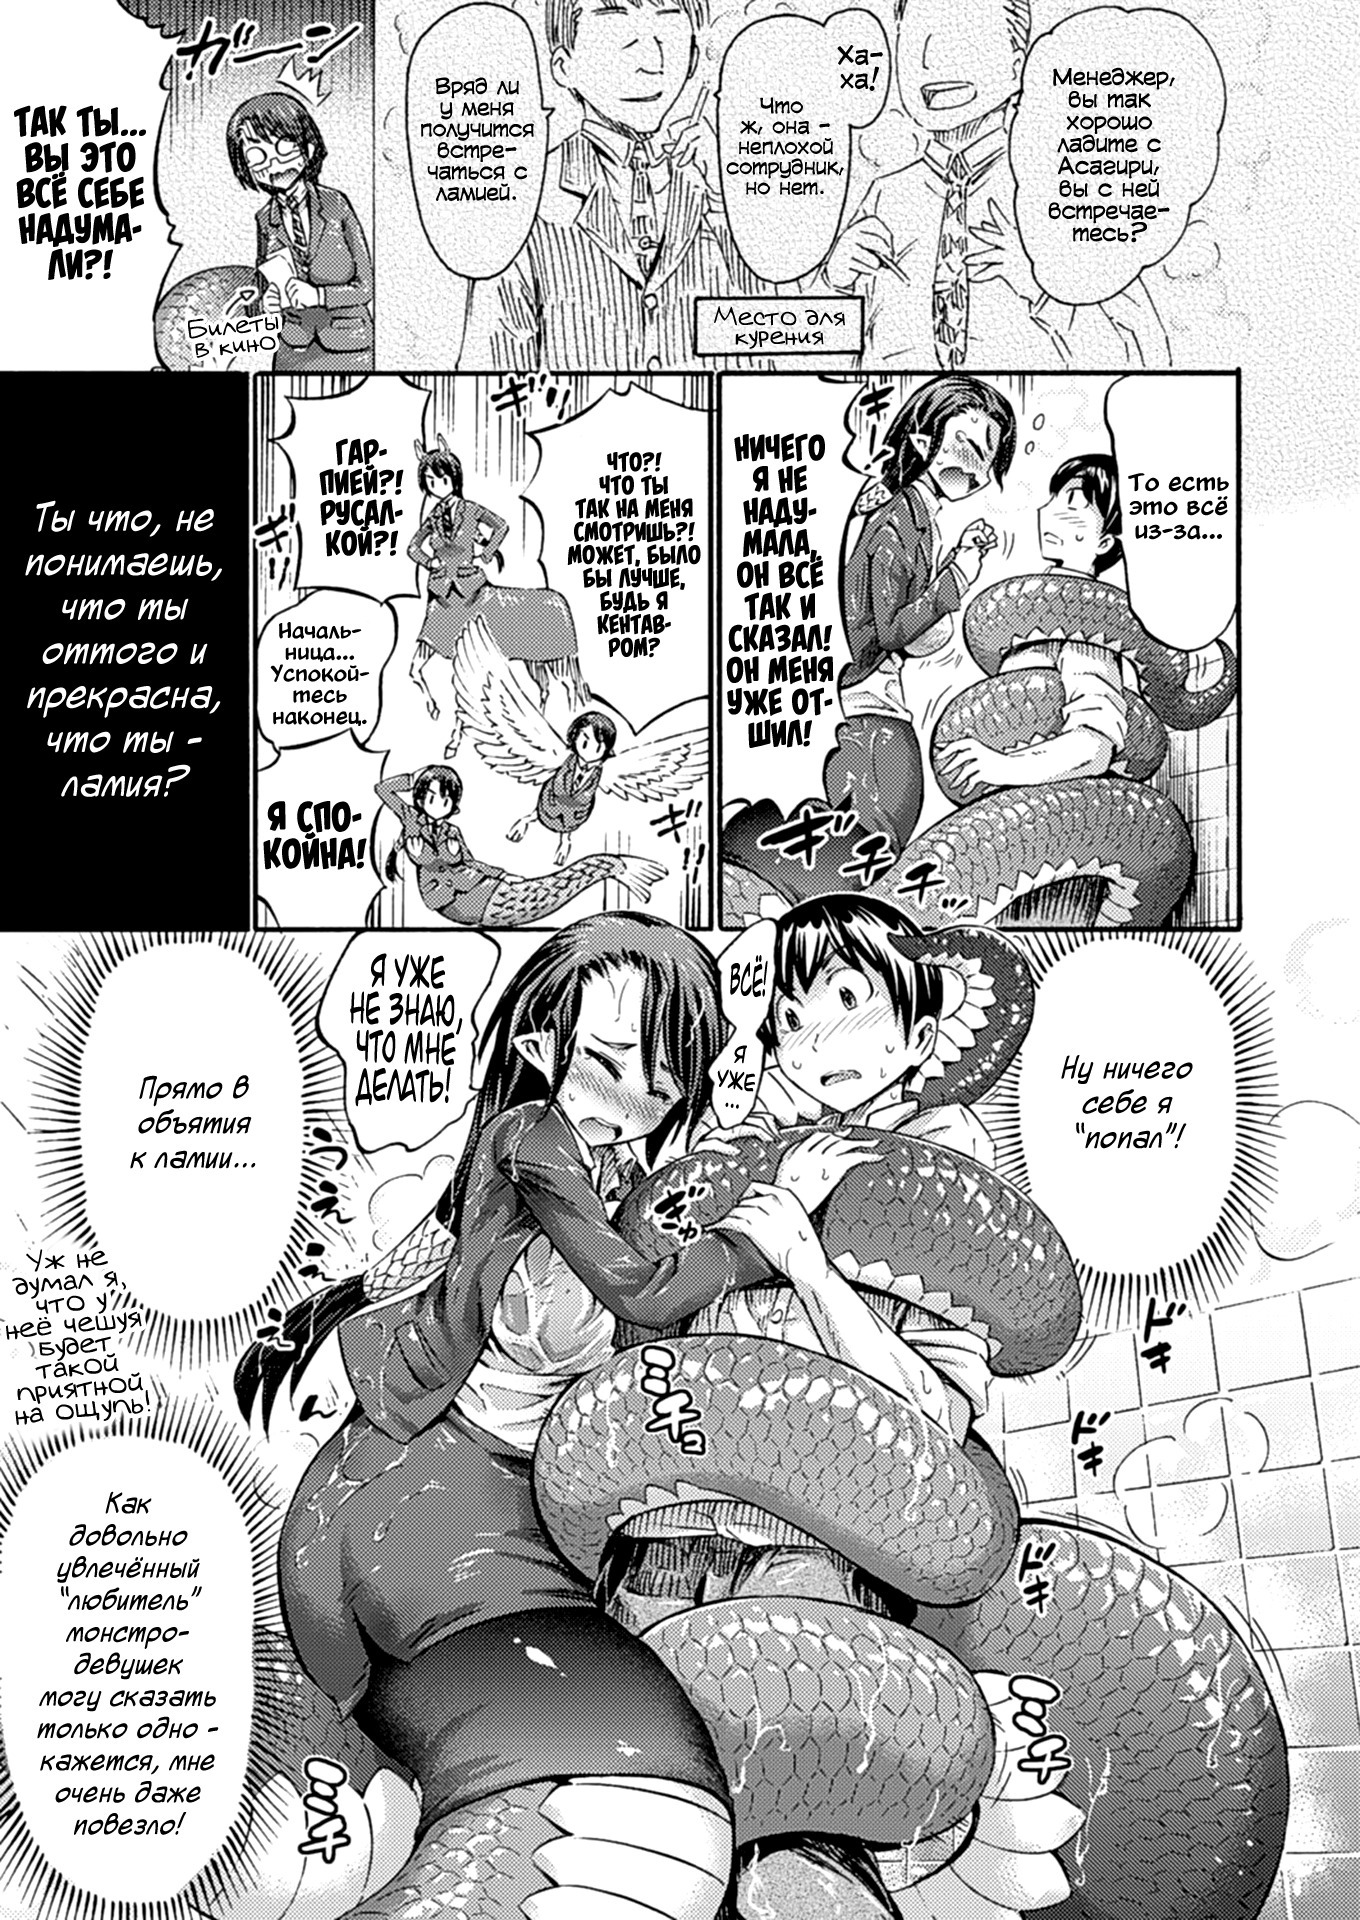 Read Omochikaeri Lamia Lamia, the Carry-Out Office Lady online for free |  Doujin.sexy